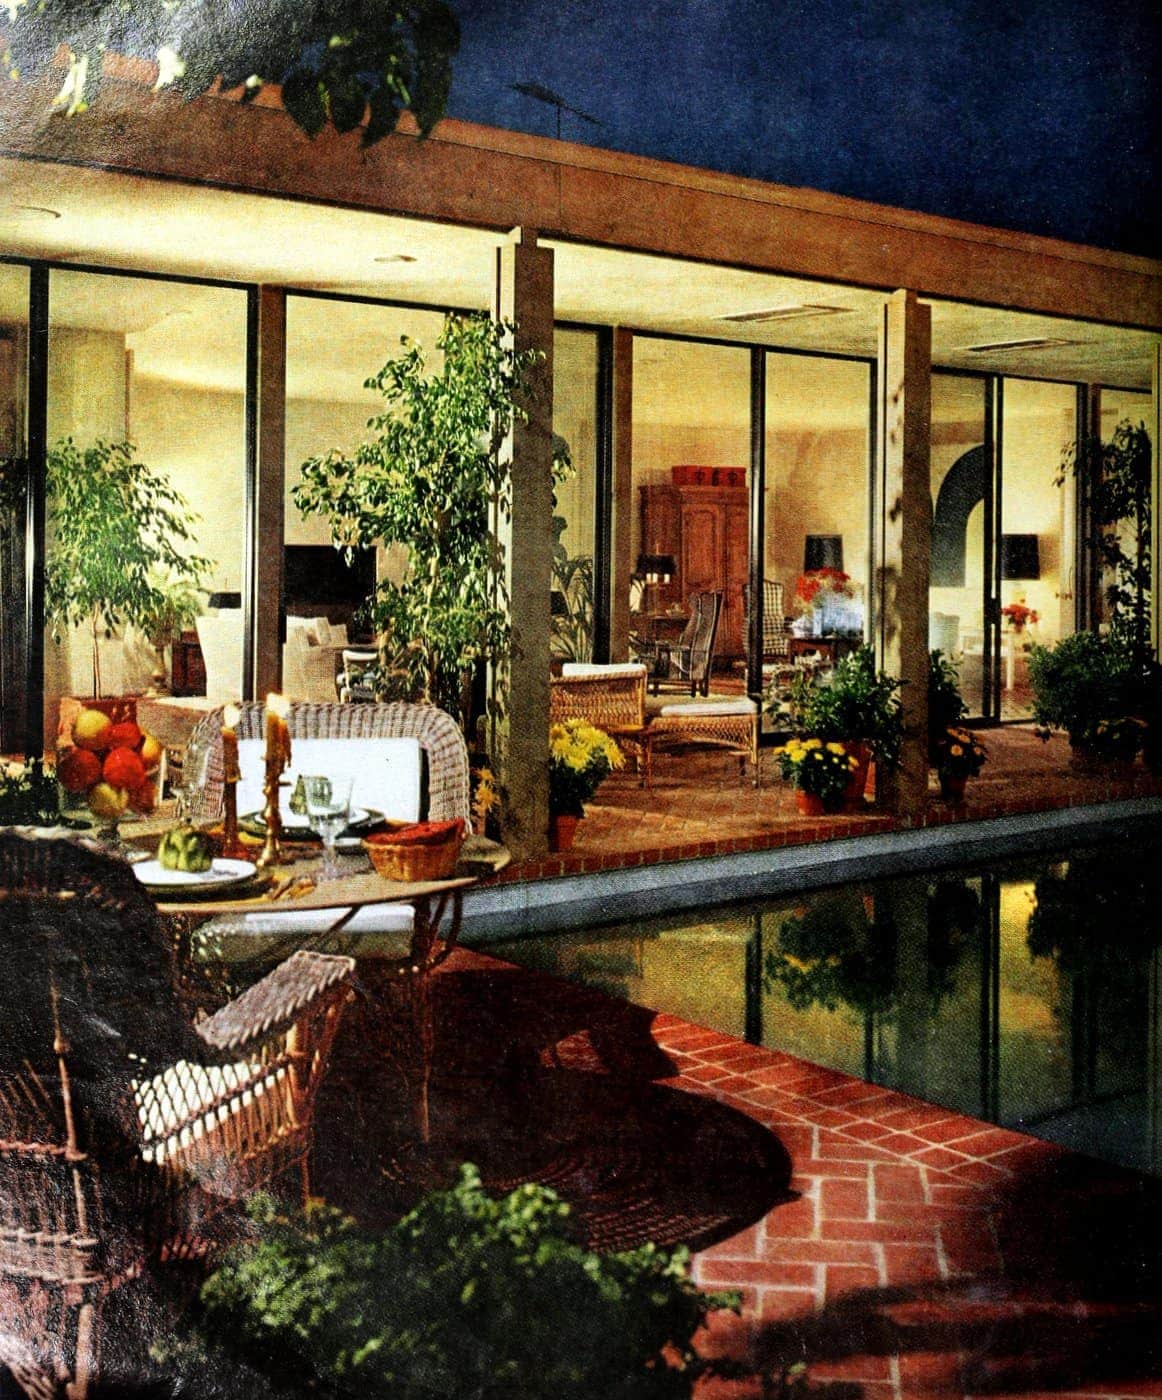 Retro Revival: Incorporating Vintage Vibes Into Your Above Ground Pool Area